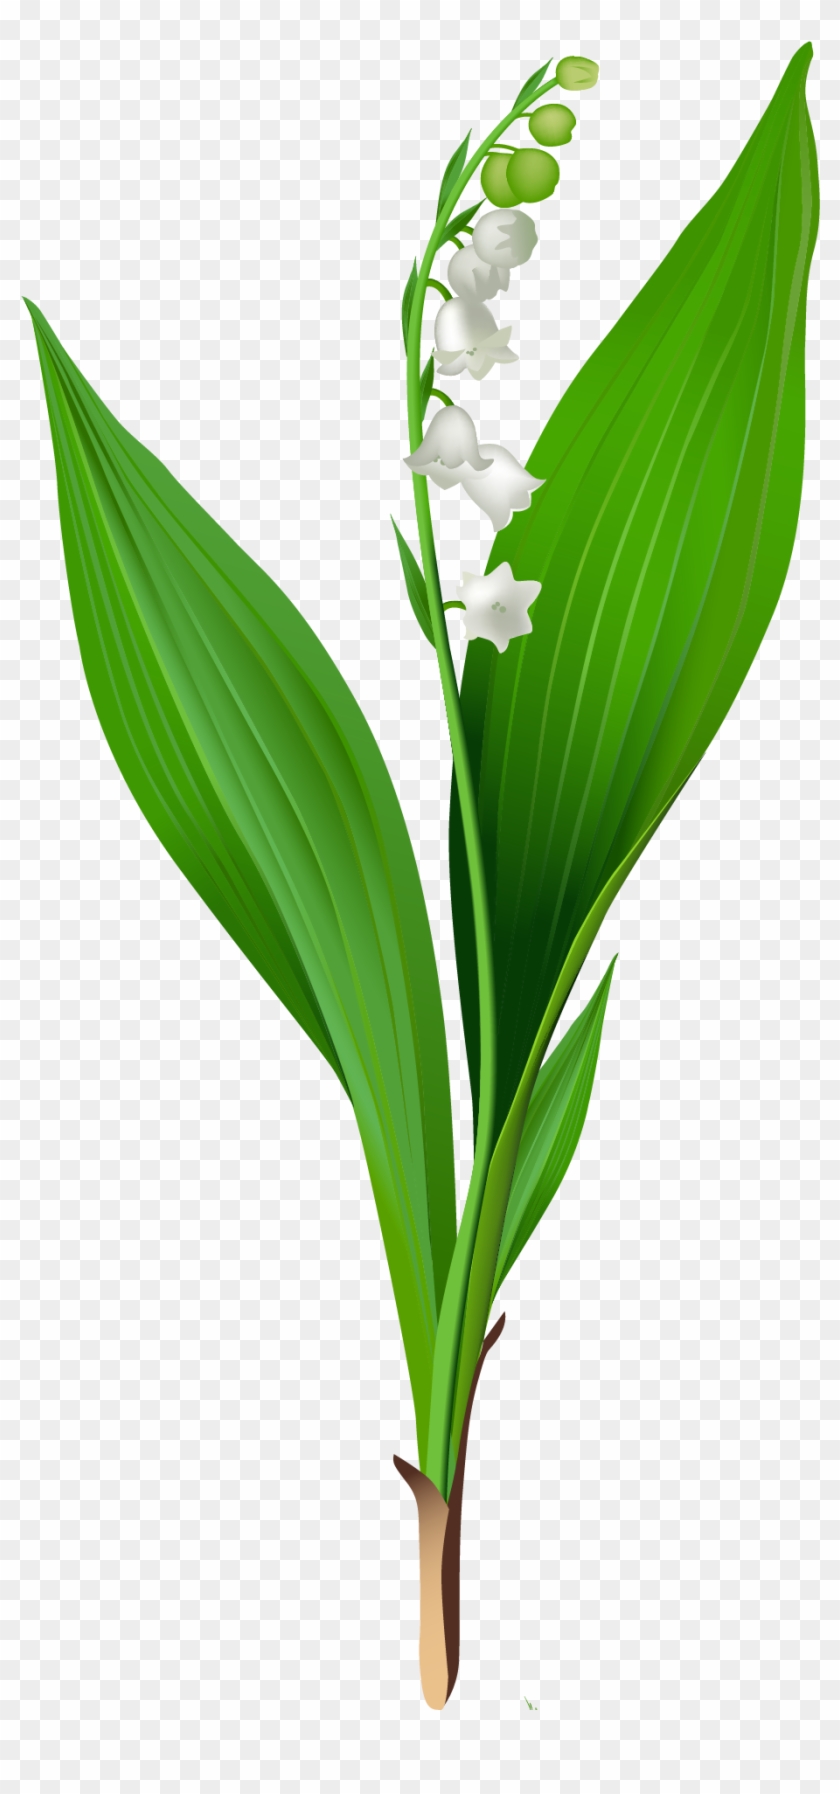 Spring Lily Of The Valley Png Clipartu200b Gallery - Lily Of The Valley Png #1016596